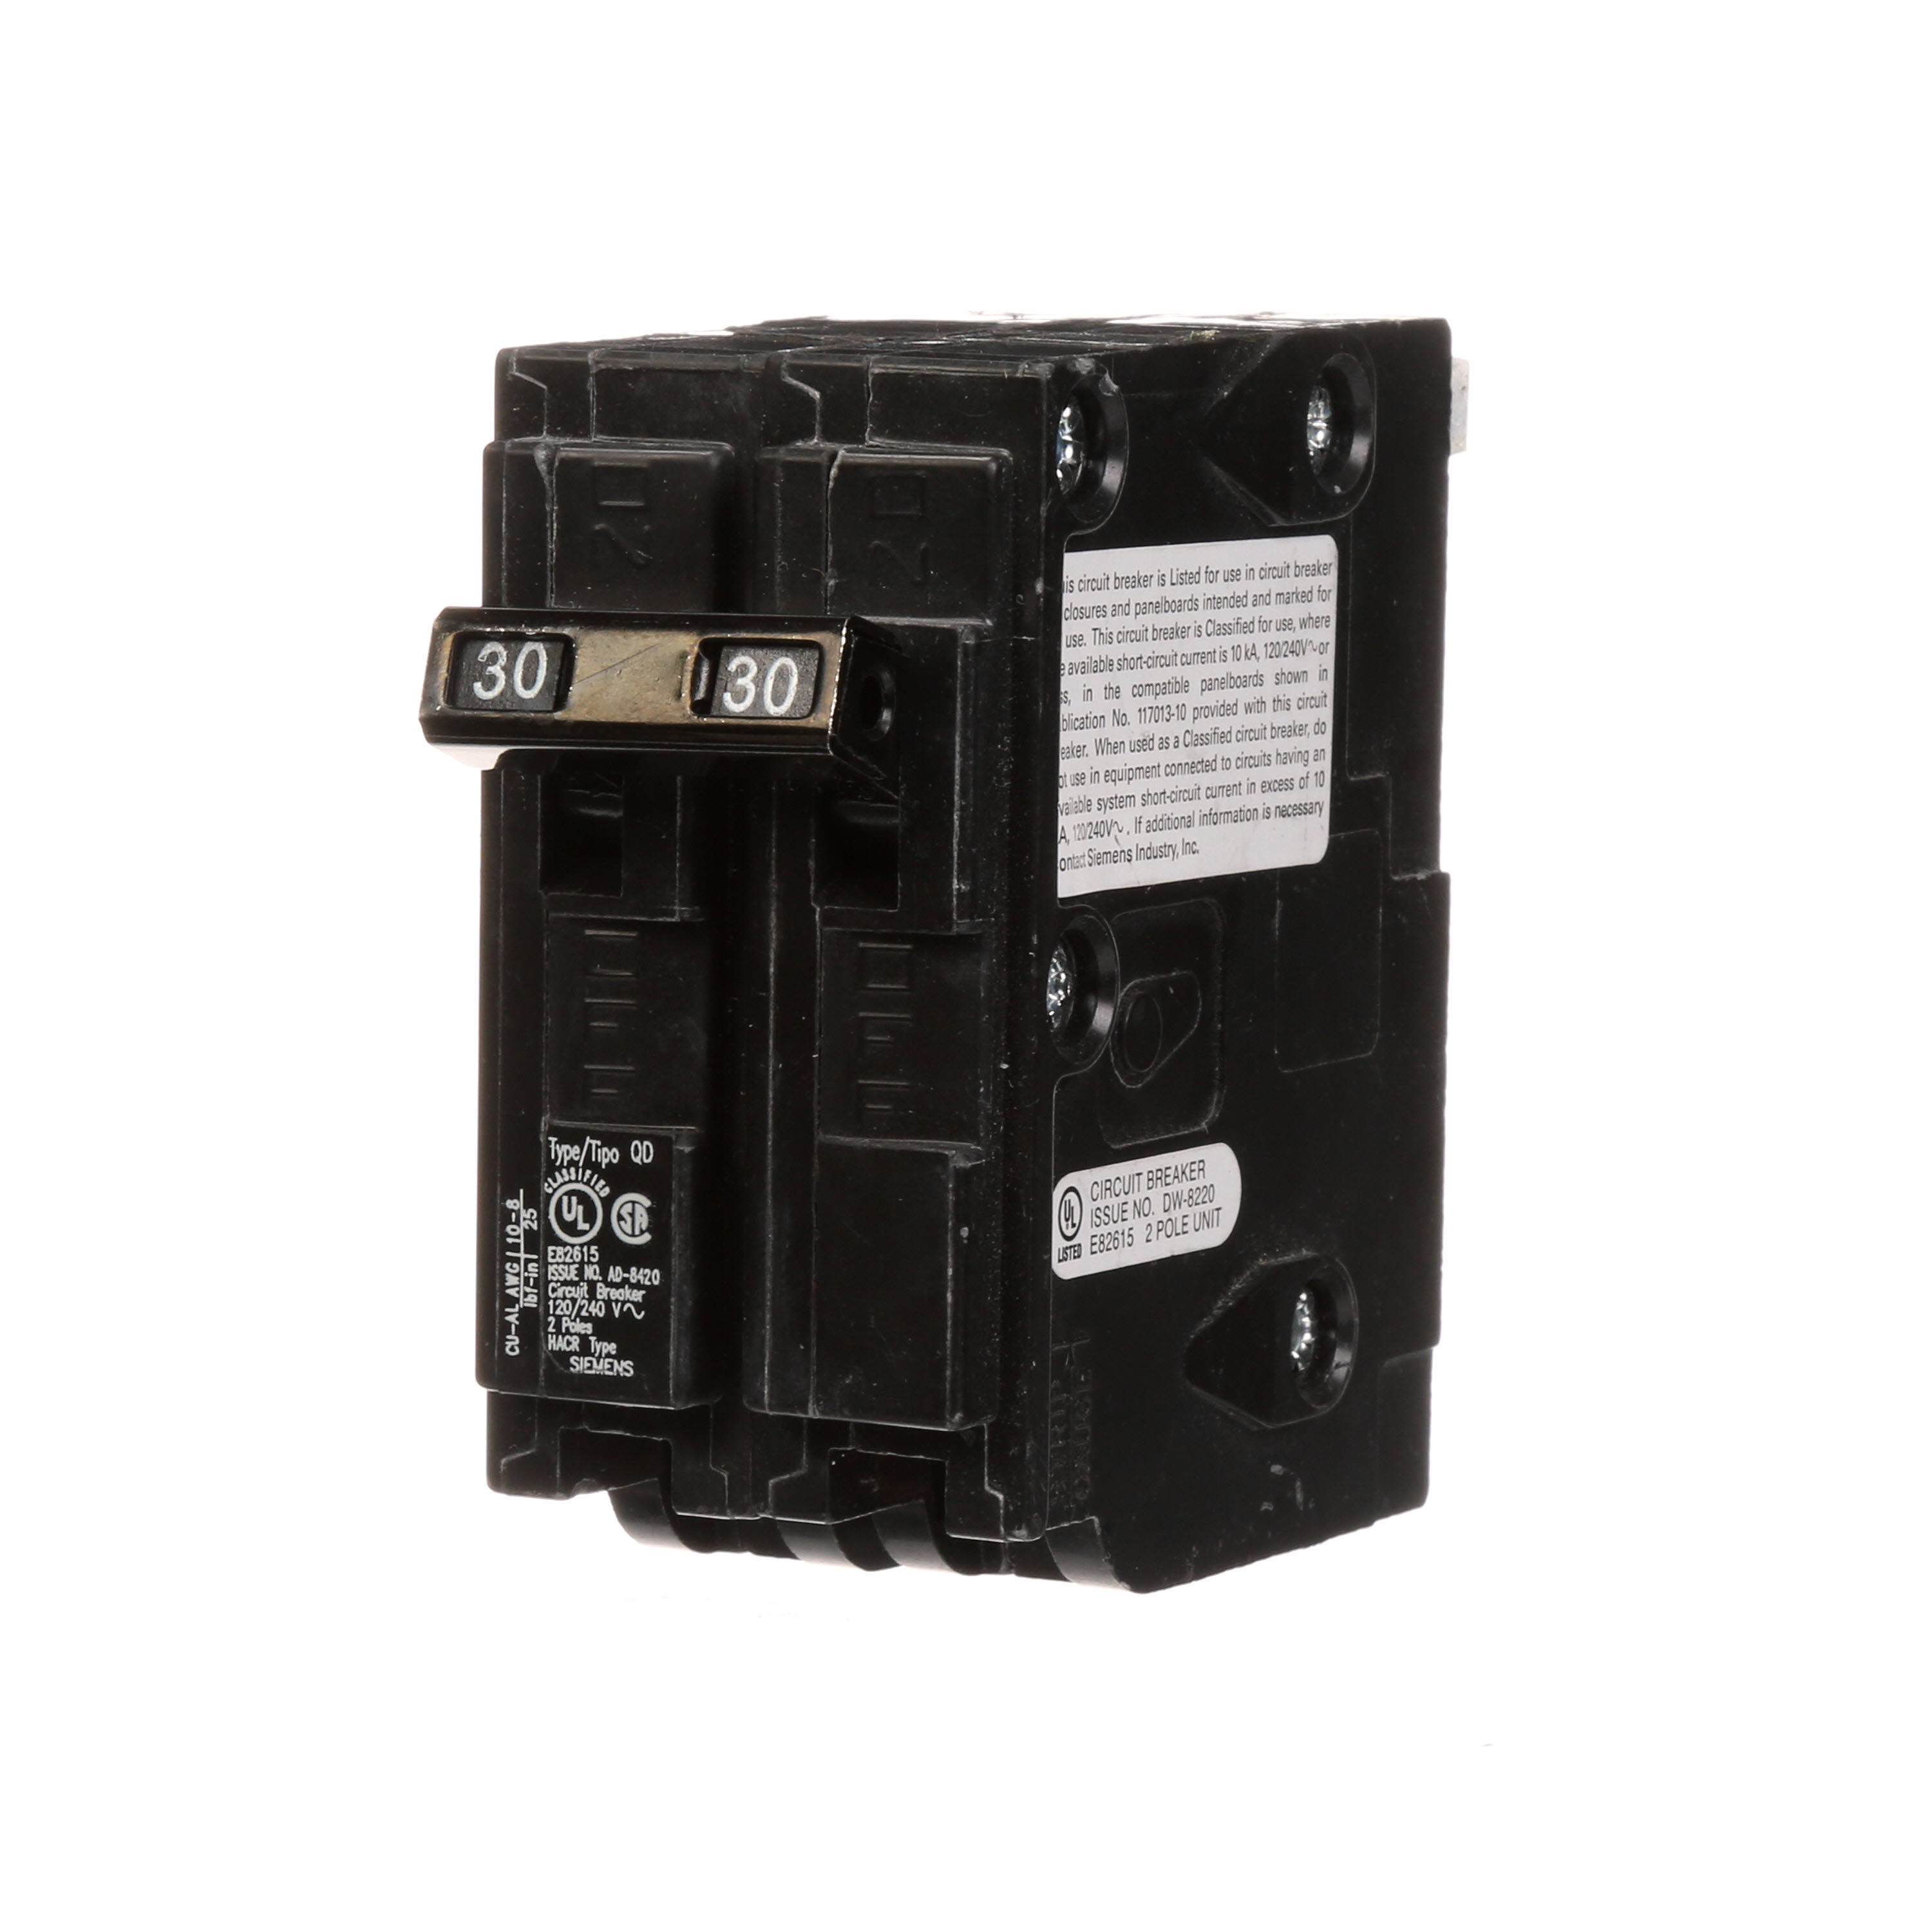 Siemens Low Voltage Residential Circuit Breakers. QD 3/4 IN Plug-In 2-Pole common trip circuit breaker. Rated 120/240V (30A) AIR (10 kA). Special features HACRrated, UL listed and classified.